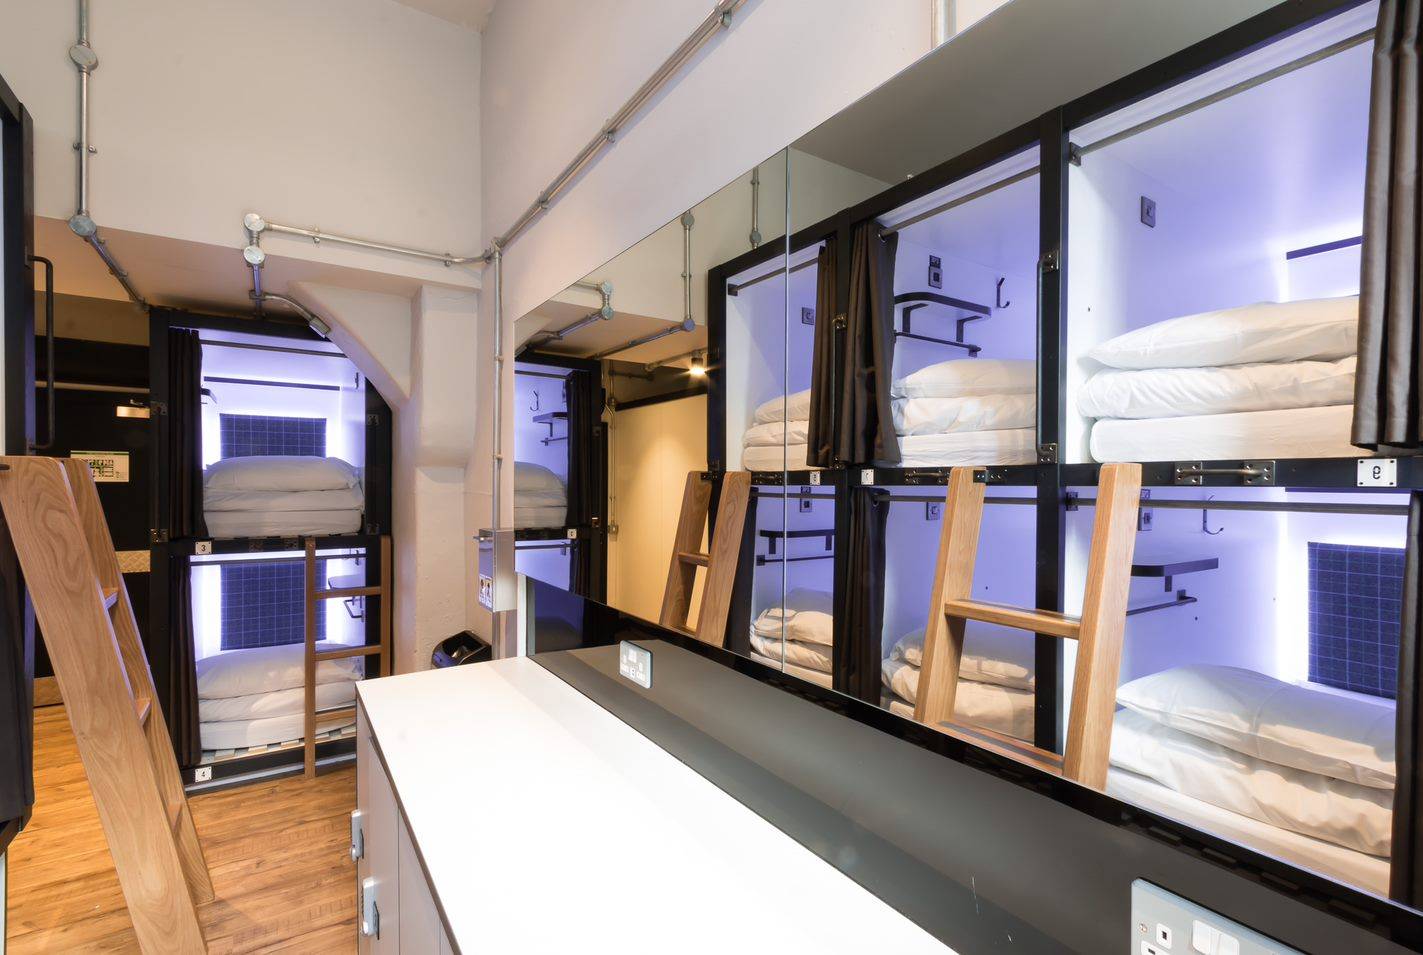 view of 8 sleeping pods in 8 bed dormitory. All with linen and ambient light., Code Hostels